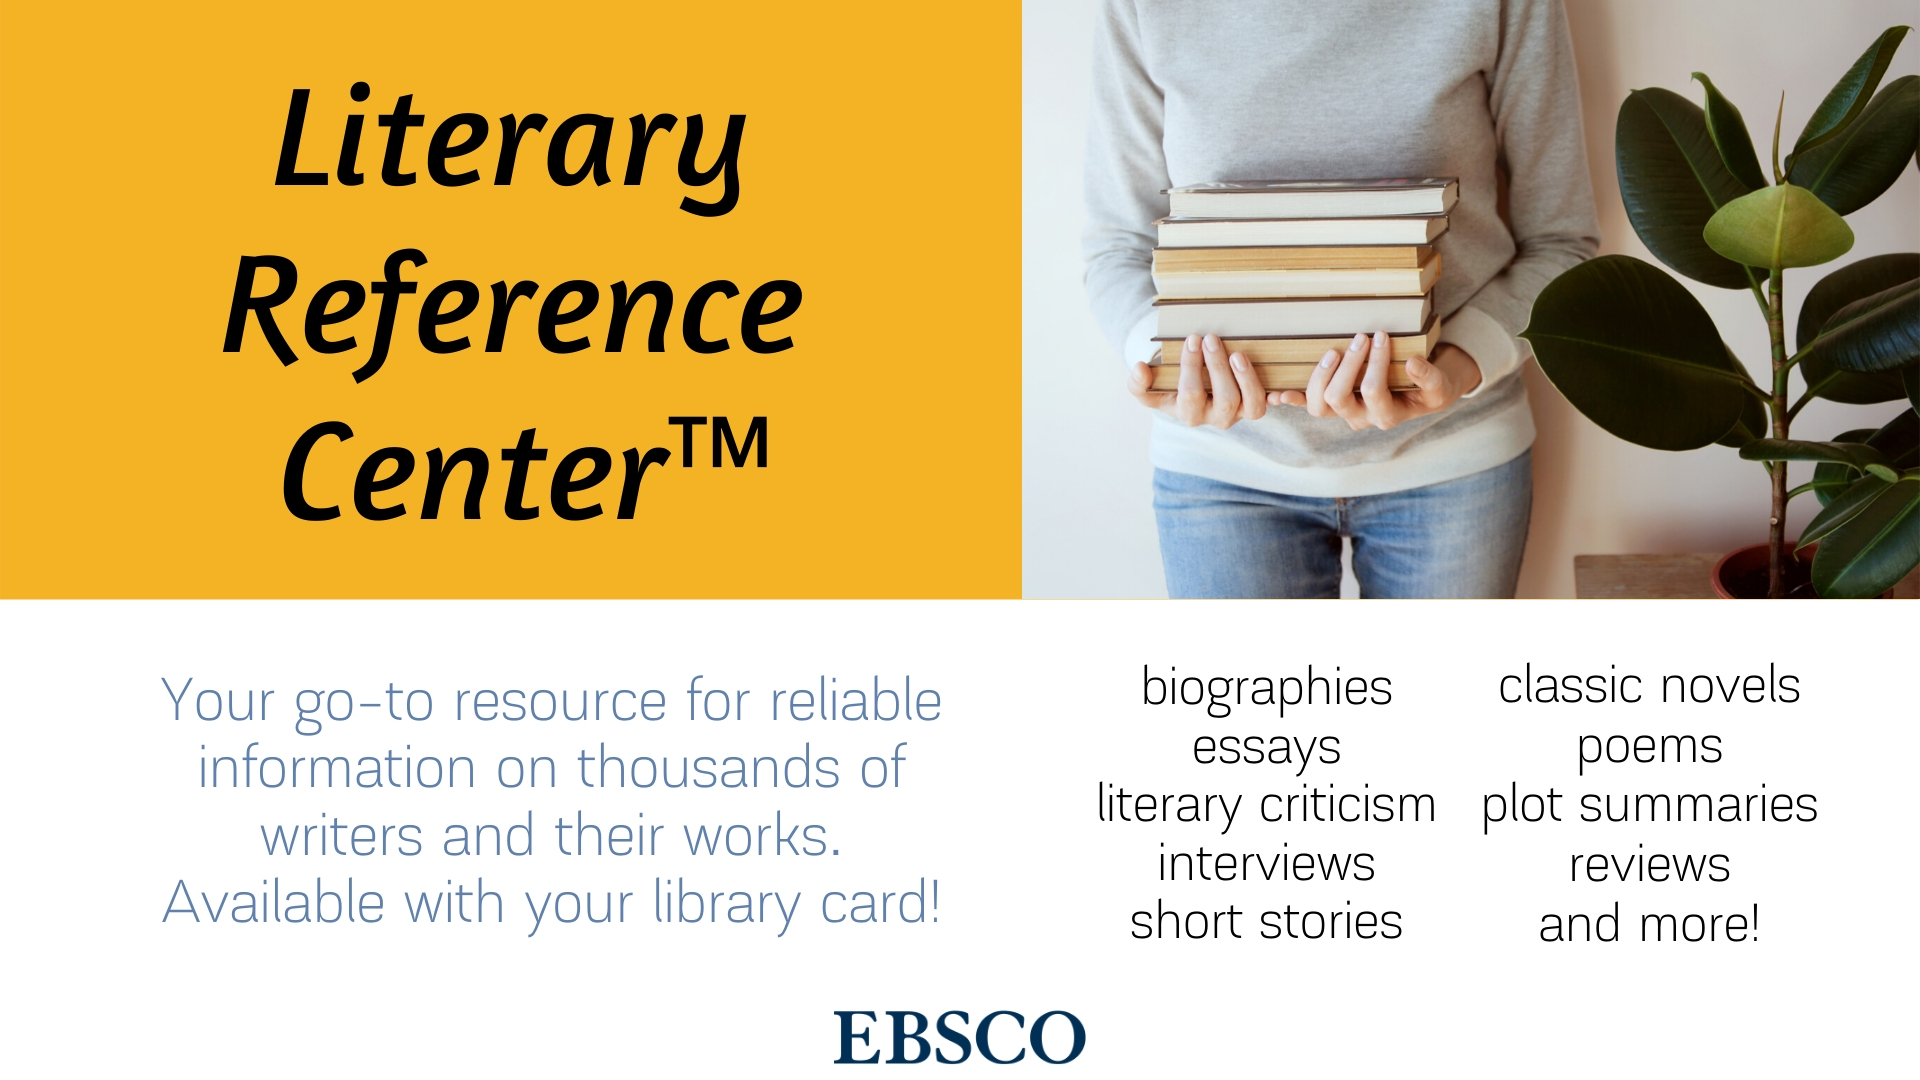 A graphic advertising the Literary Reference Center for digital signage